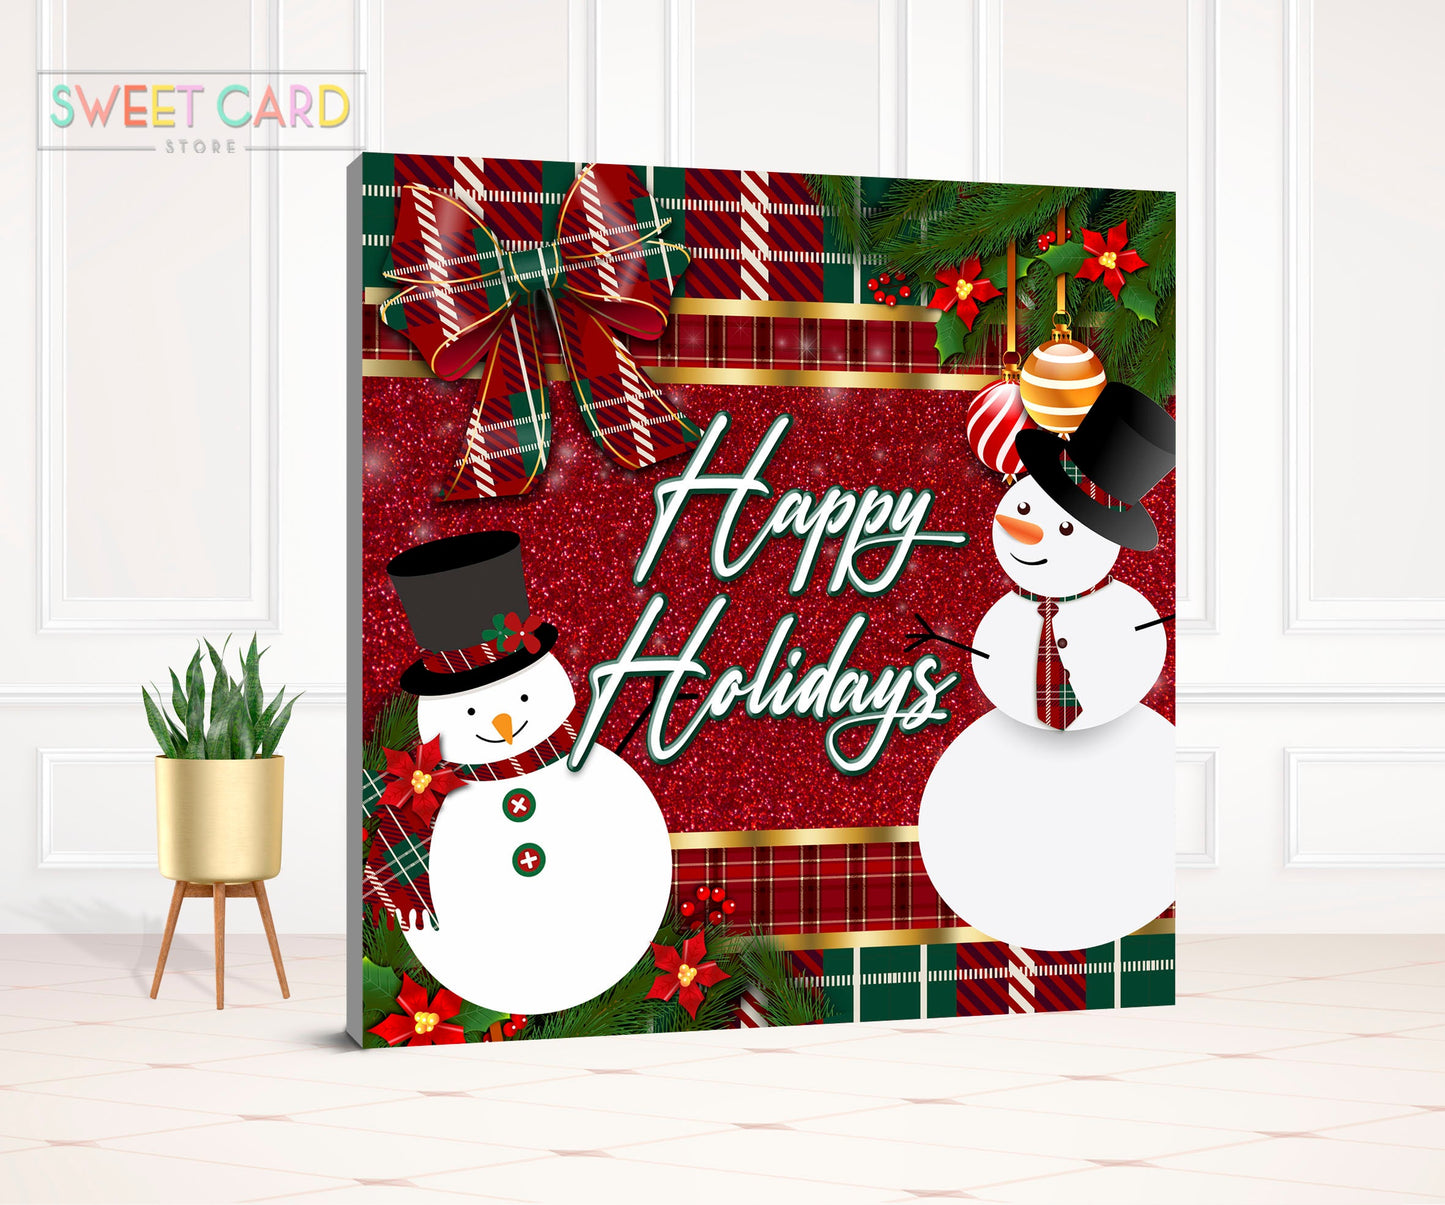 Merry christmas party backdrop, christmas decor party Backdrop, christmas backdrop, christmas ornaments party backdrop, ugly sweater decor